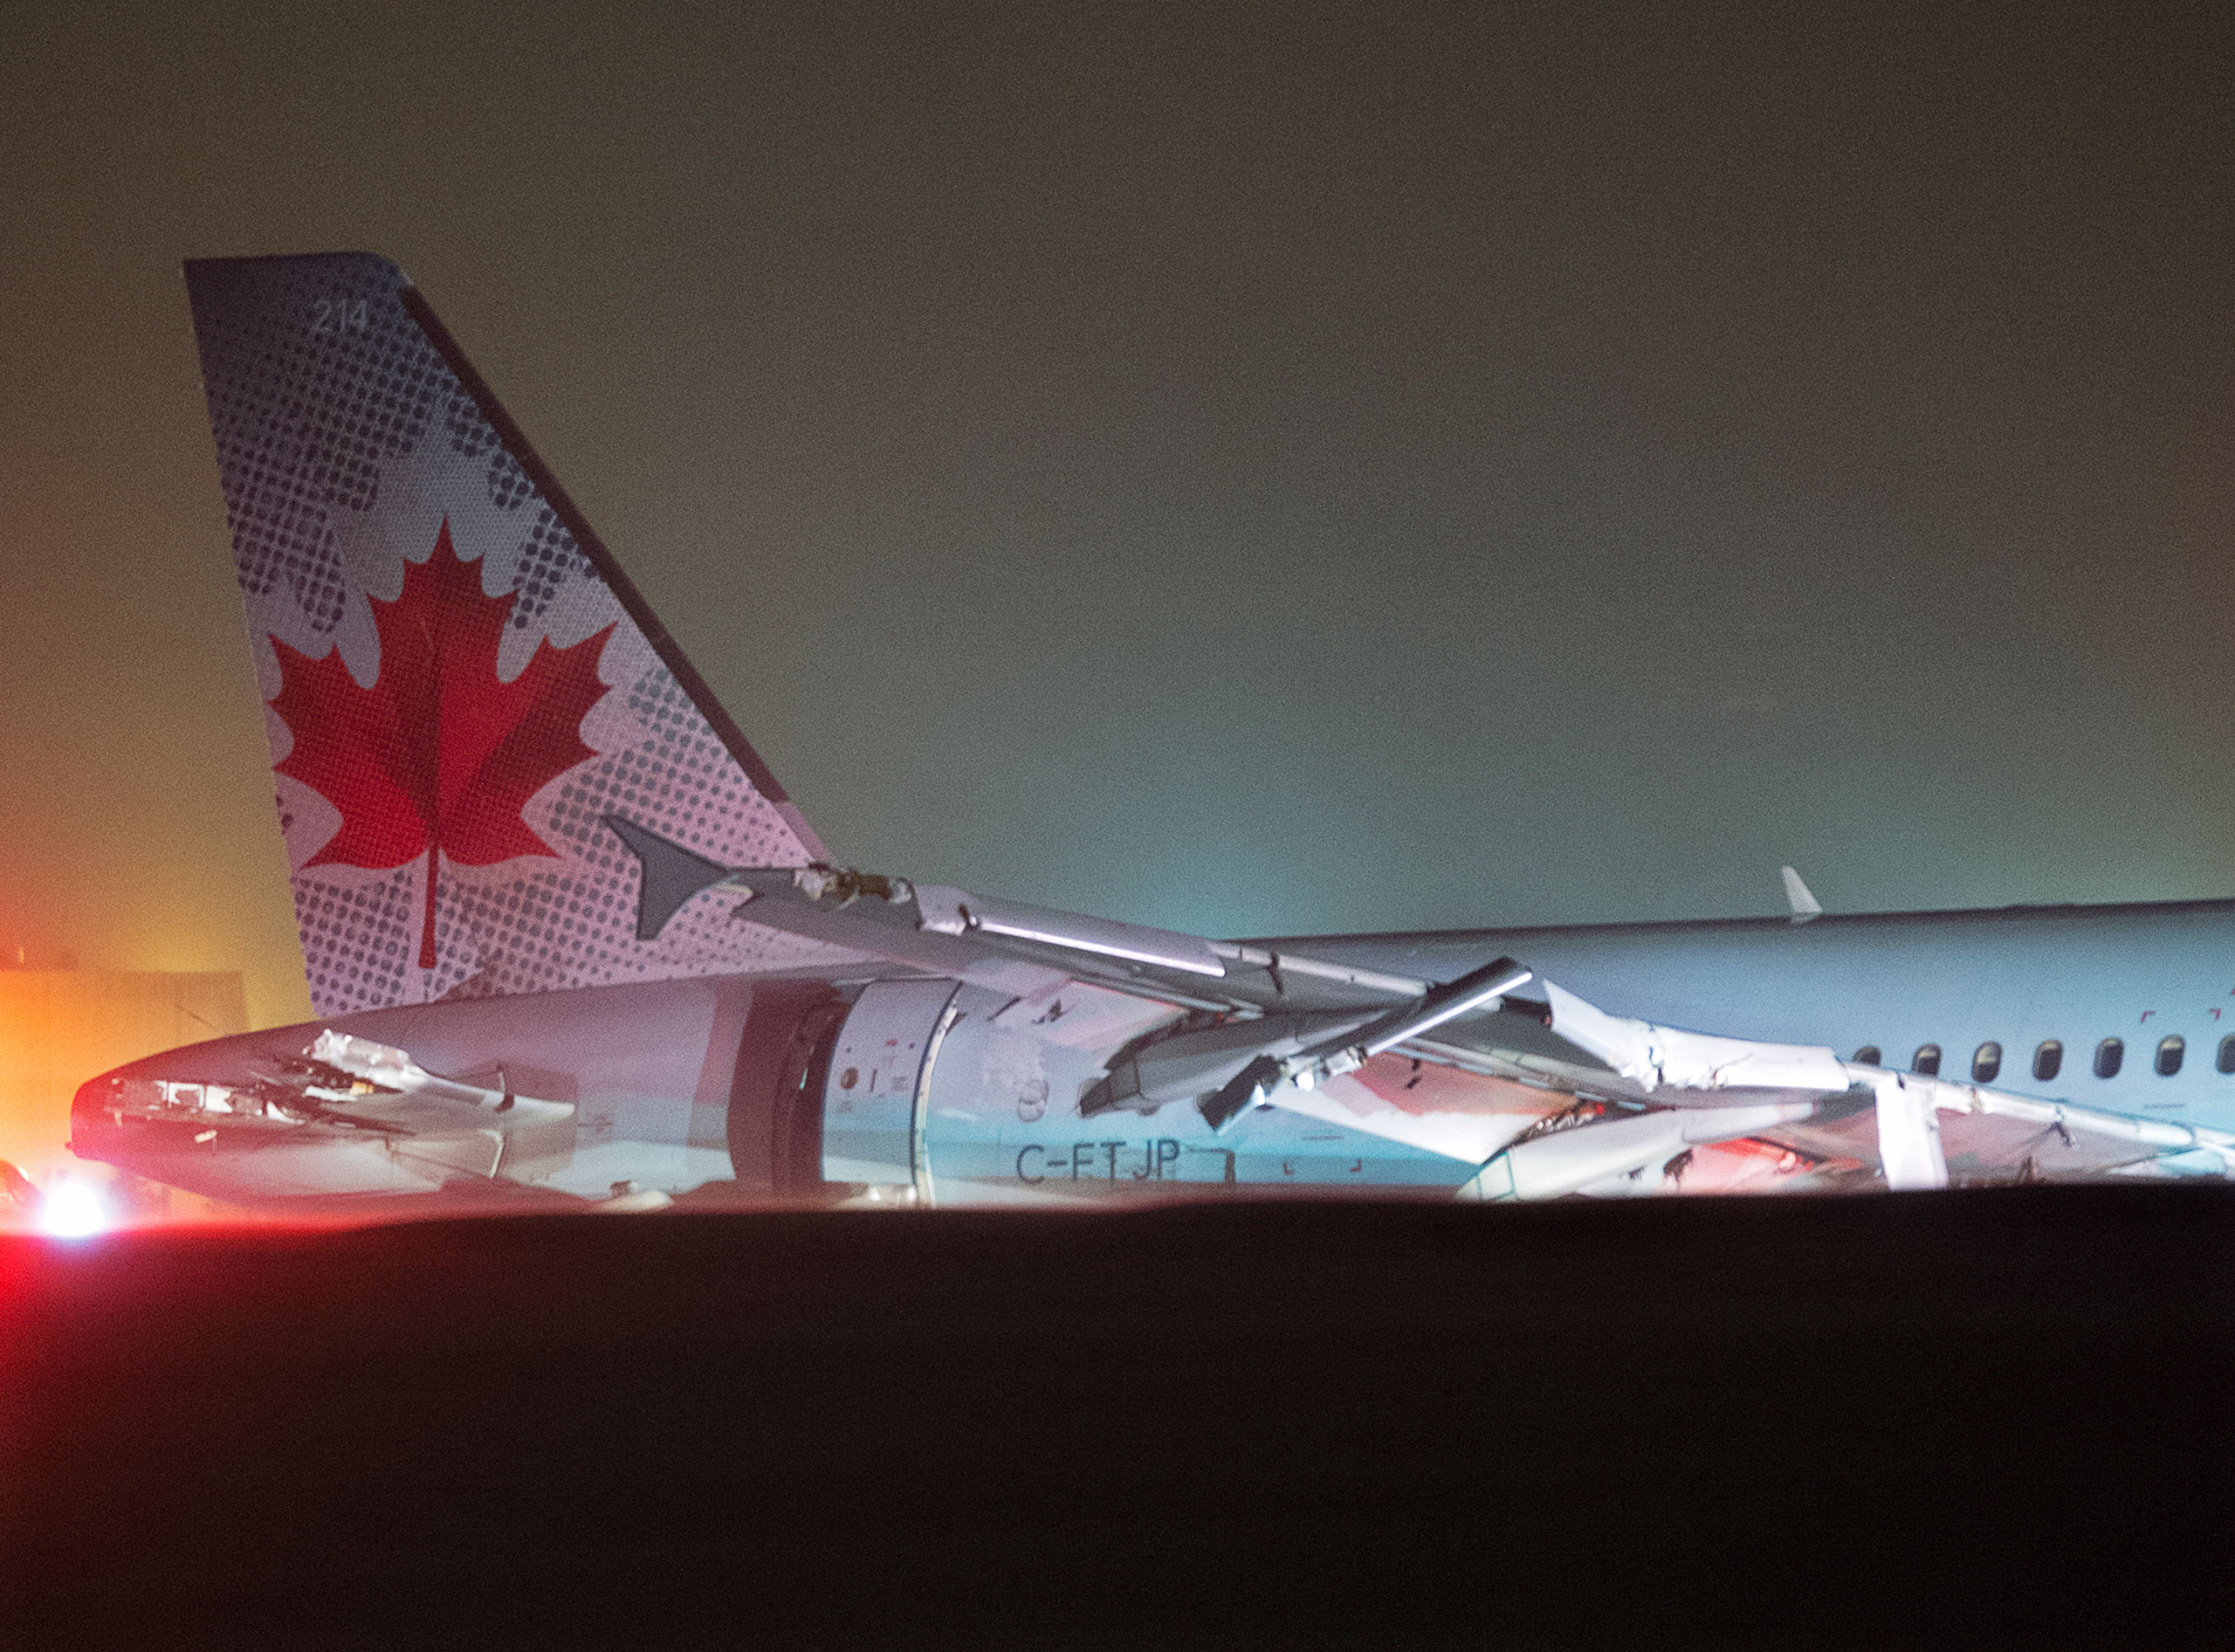 Air Canada flight 624 rests off the runway after landing at Stanfield International Airport in Halifax, Canada on, March. 29, 2015. (Andrew Vaughan—AP)